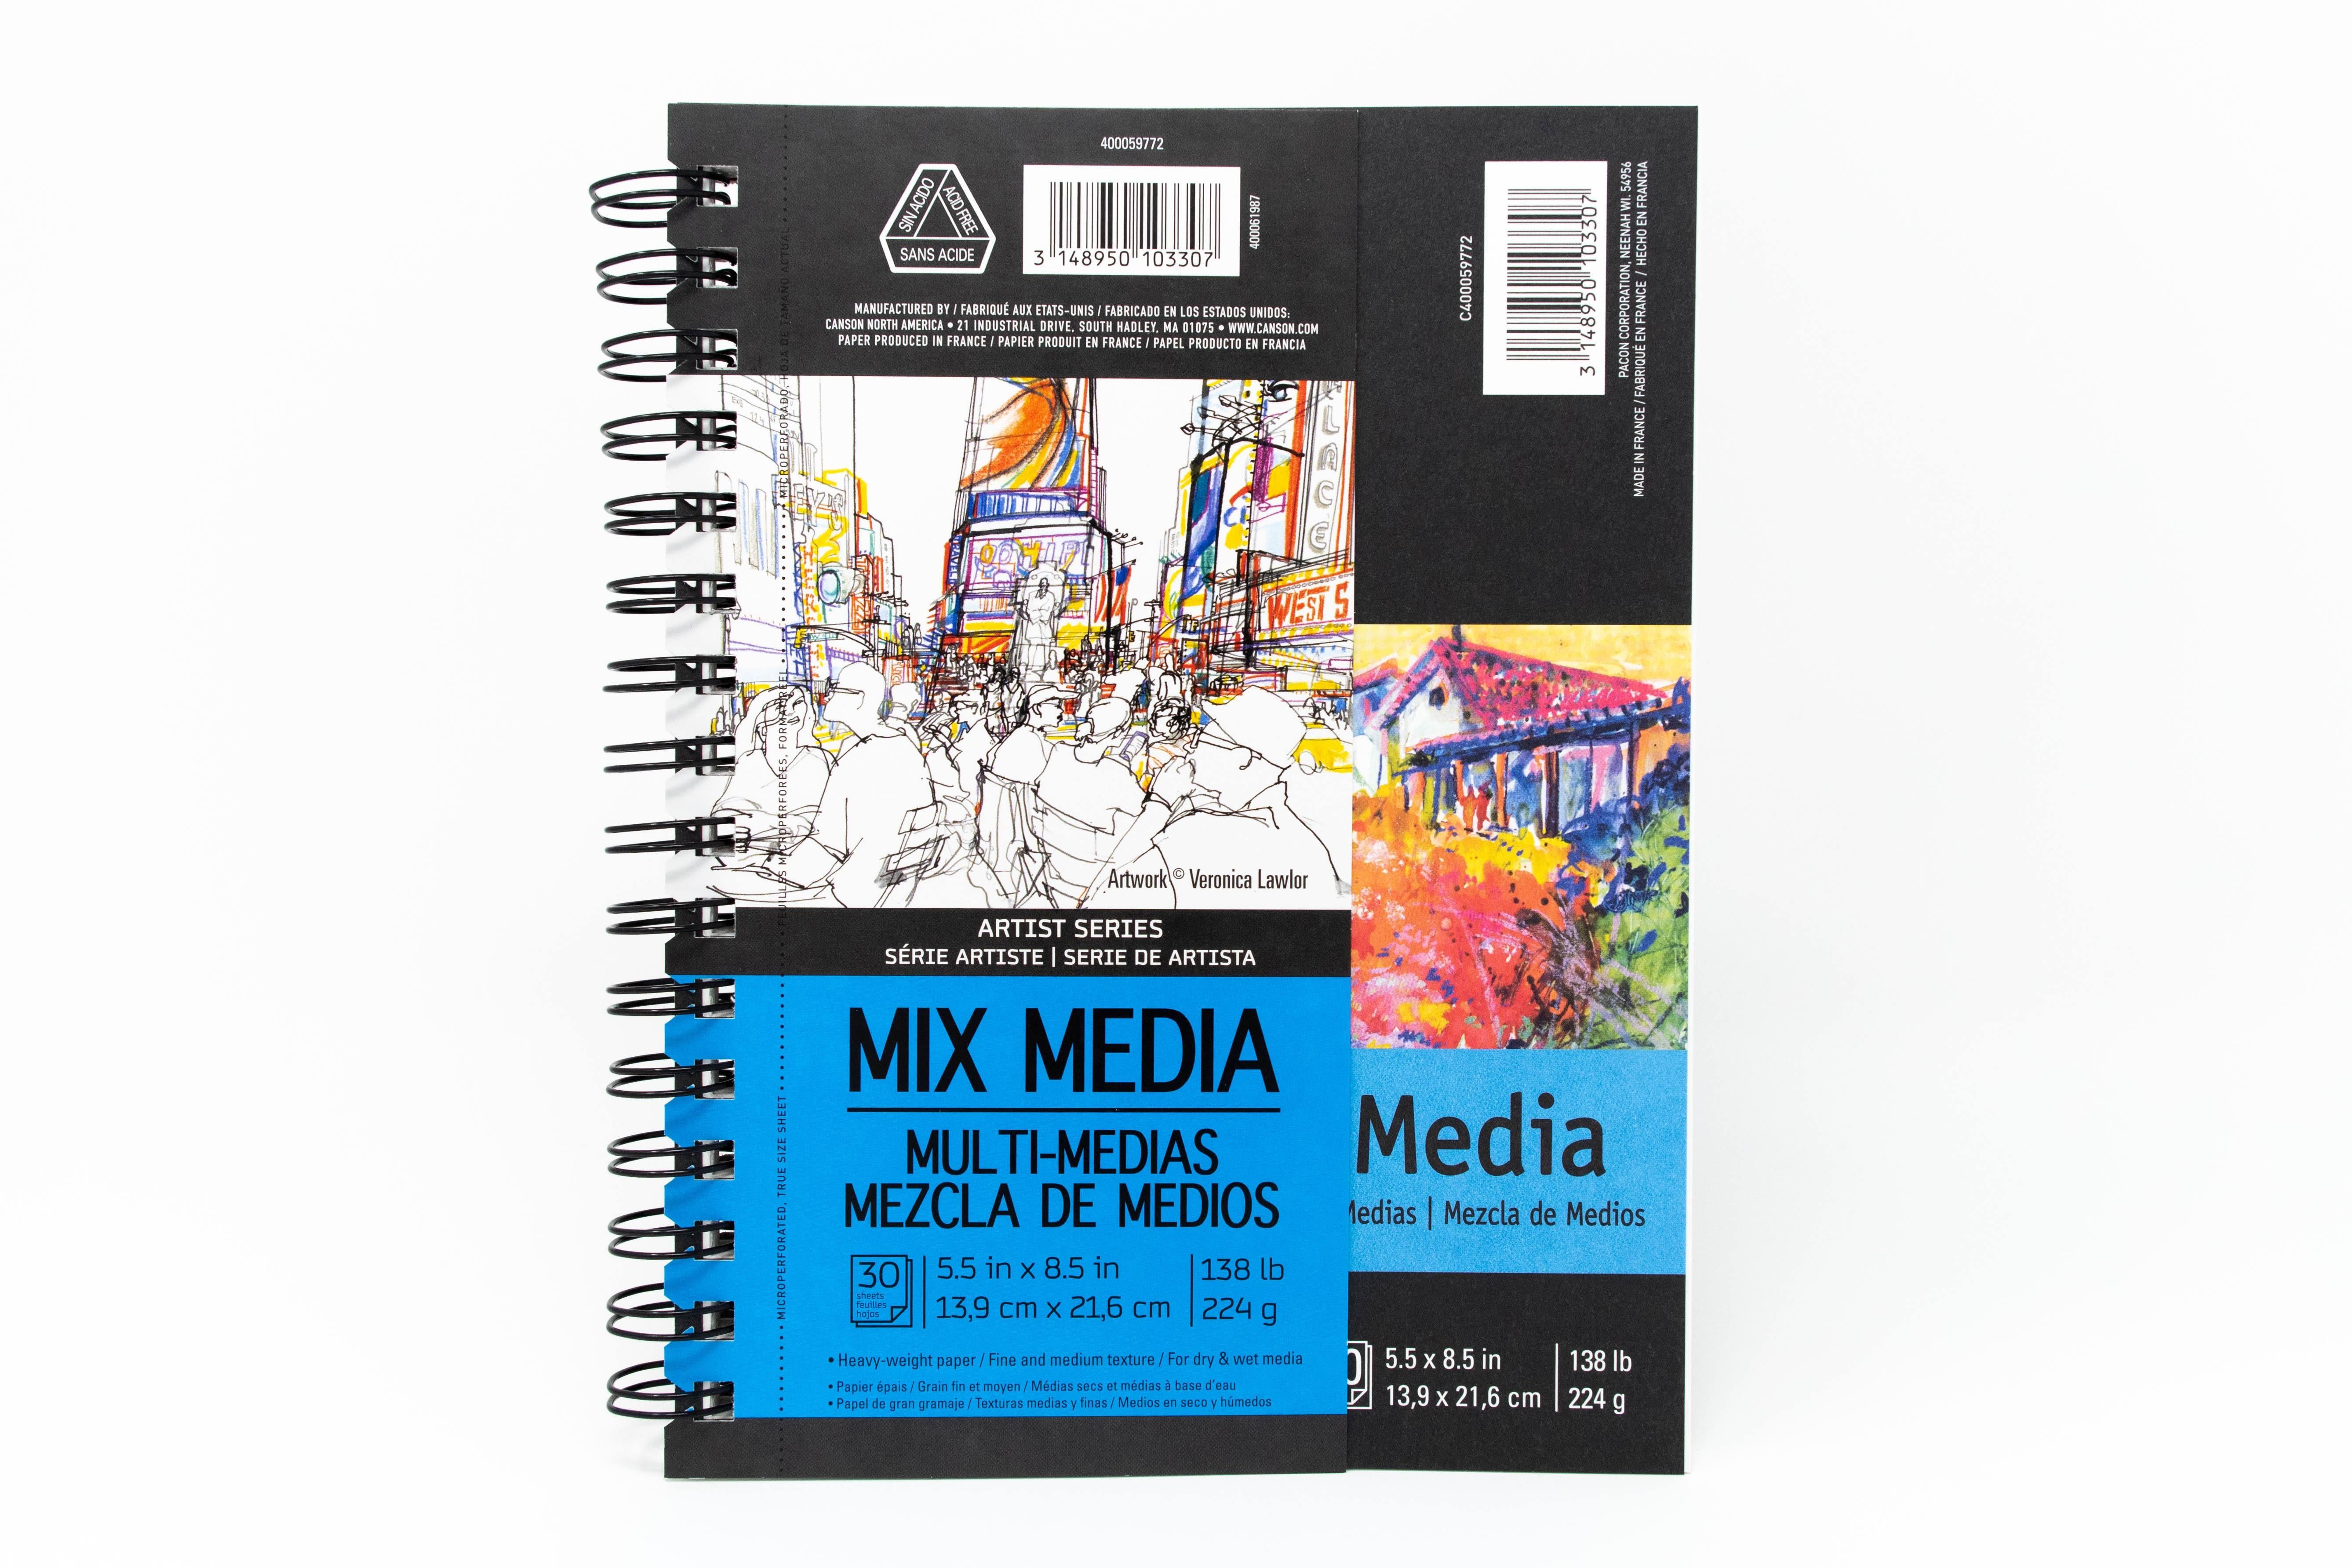 Canson Artist Series Mixed Media Book - 12 x 9, 30 Sheets